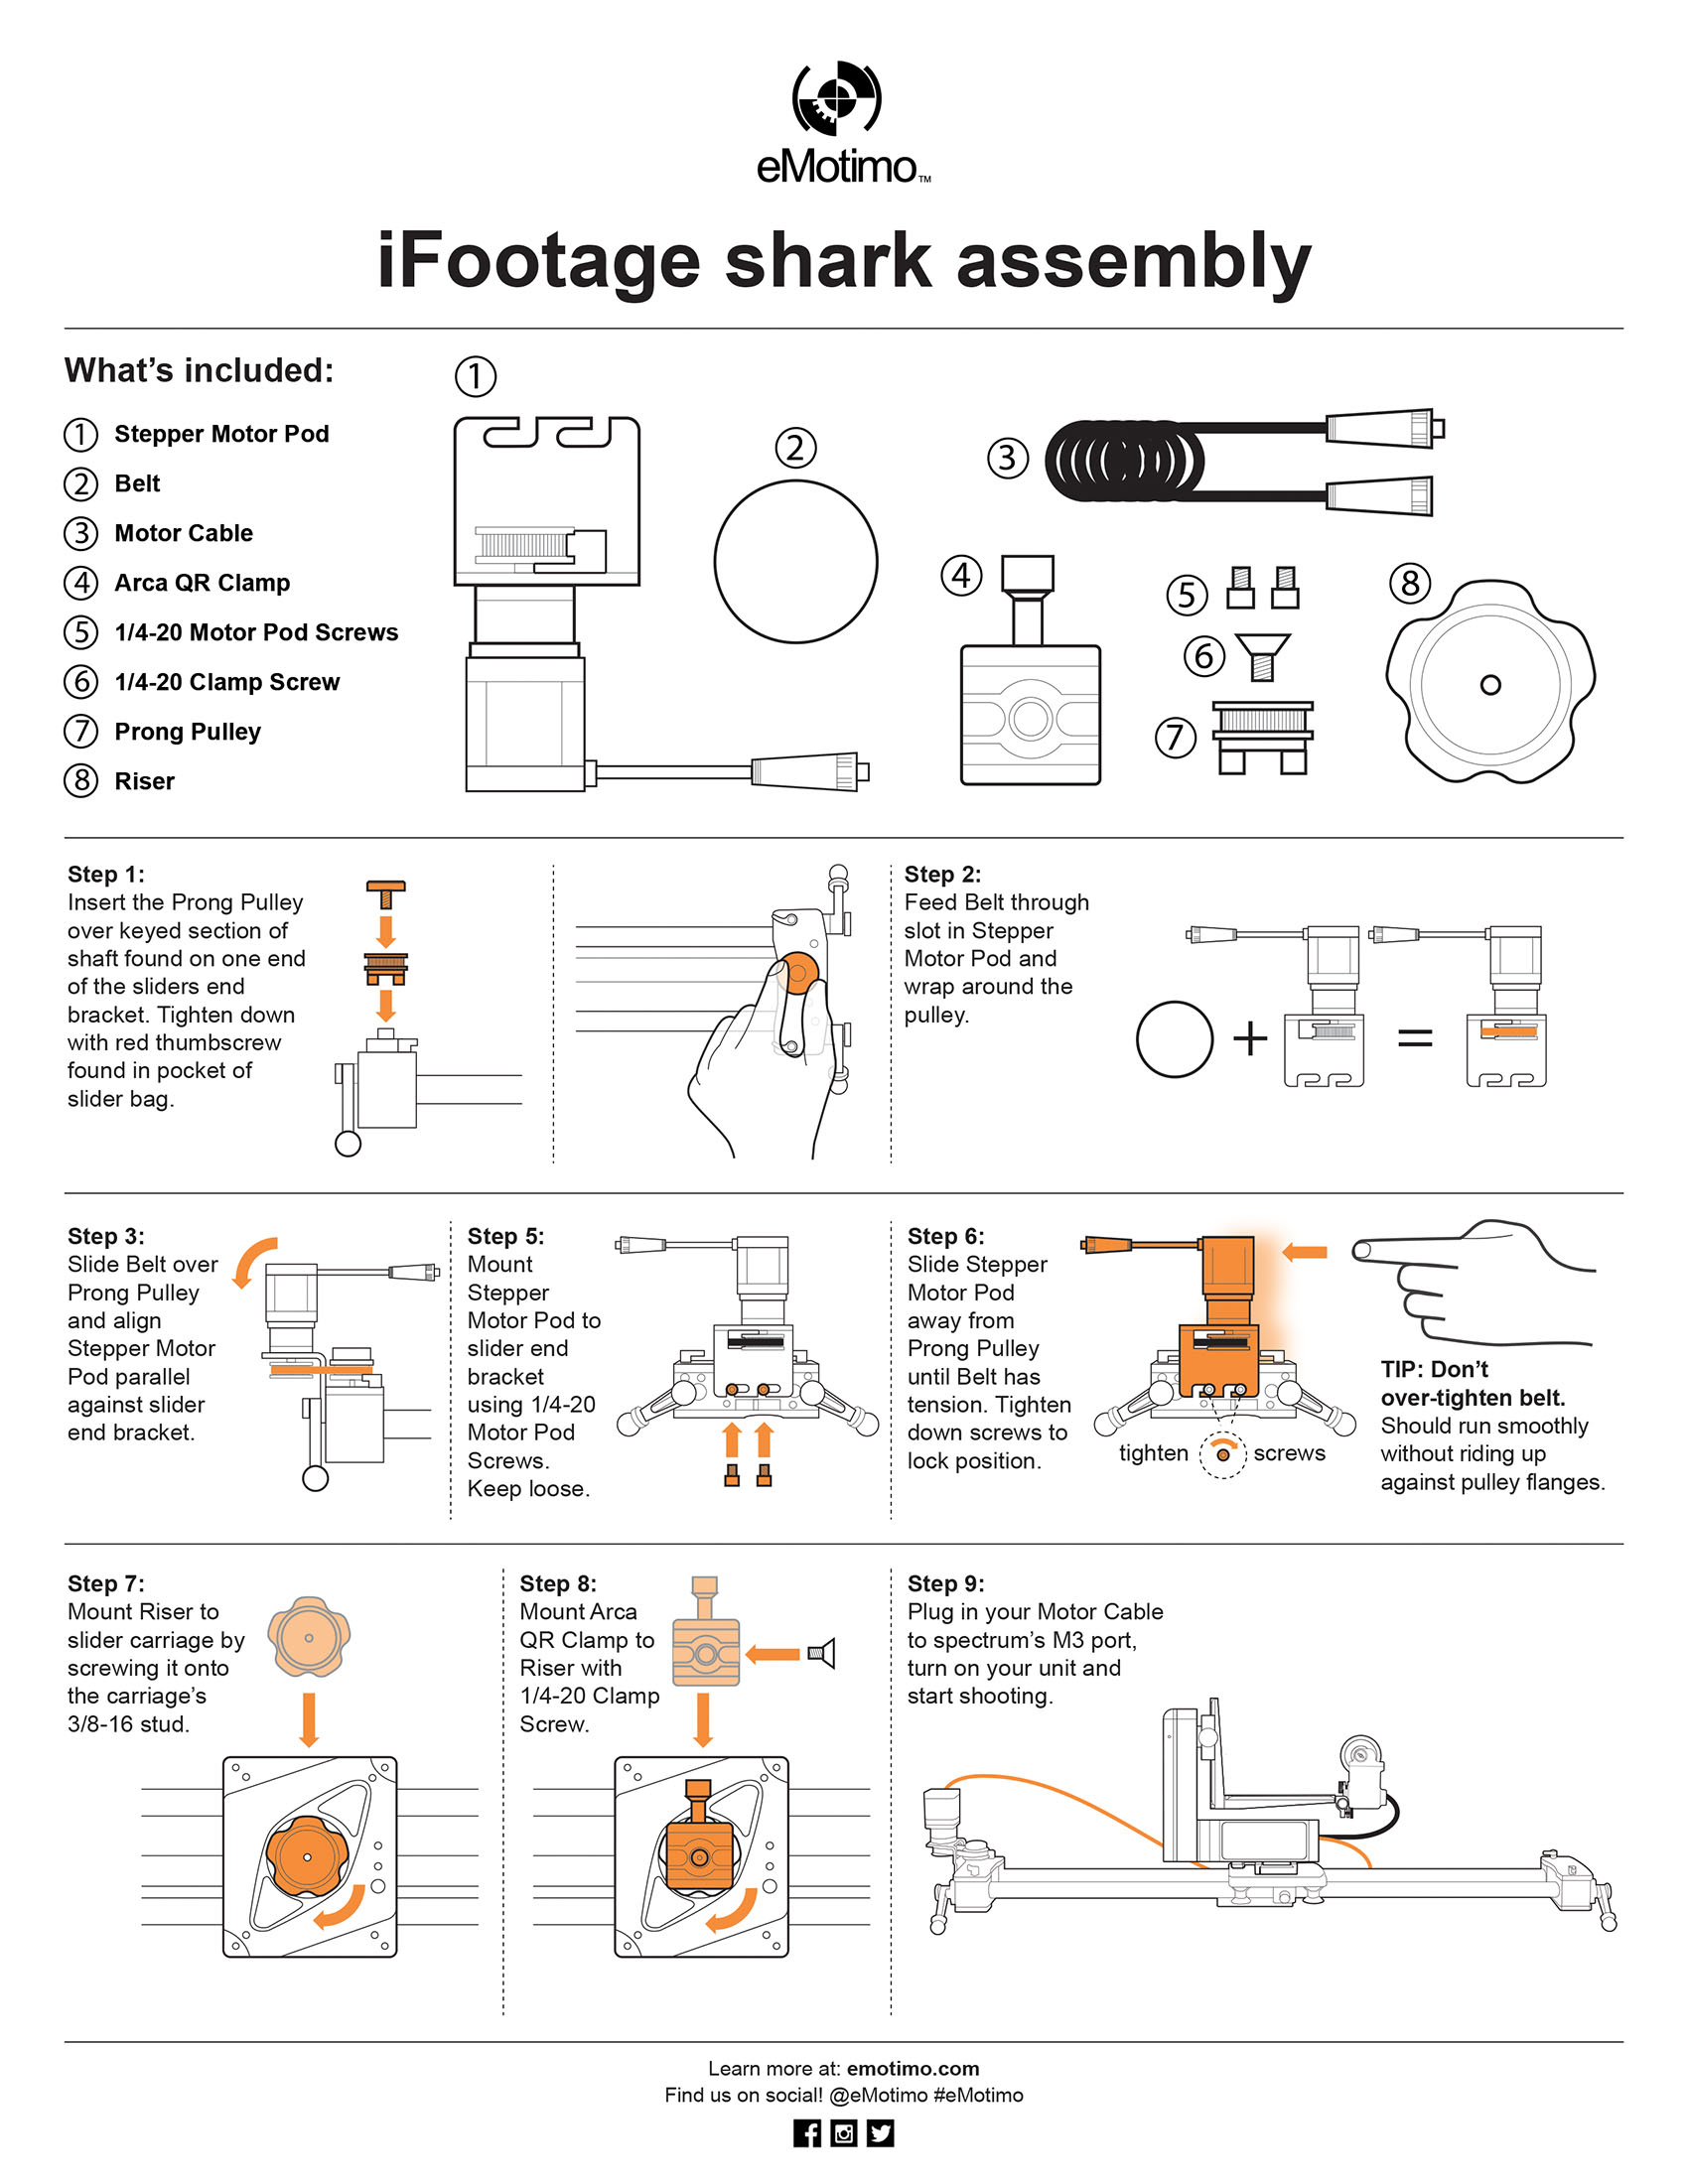 iFootage_shark_assembly_instructions.jpg